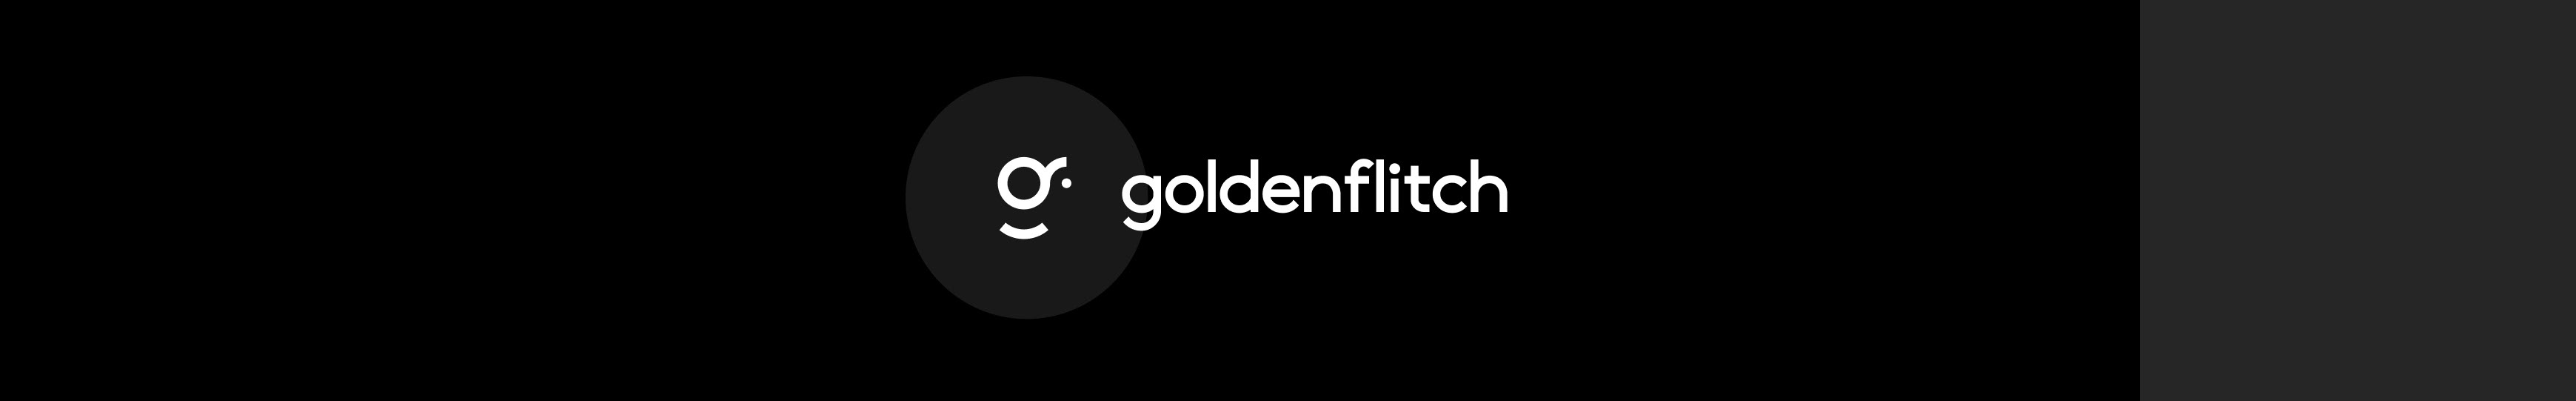 Goldenflitch ®'s profile banner